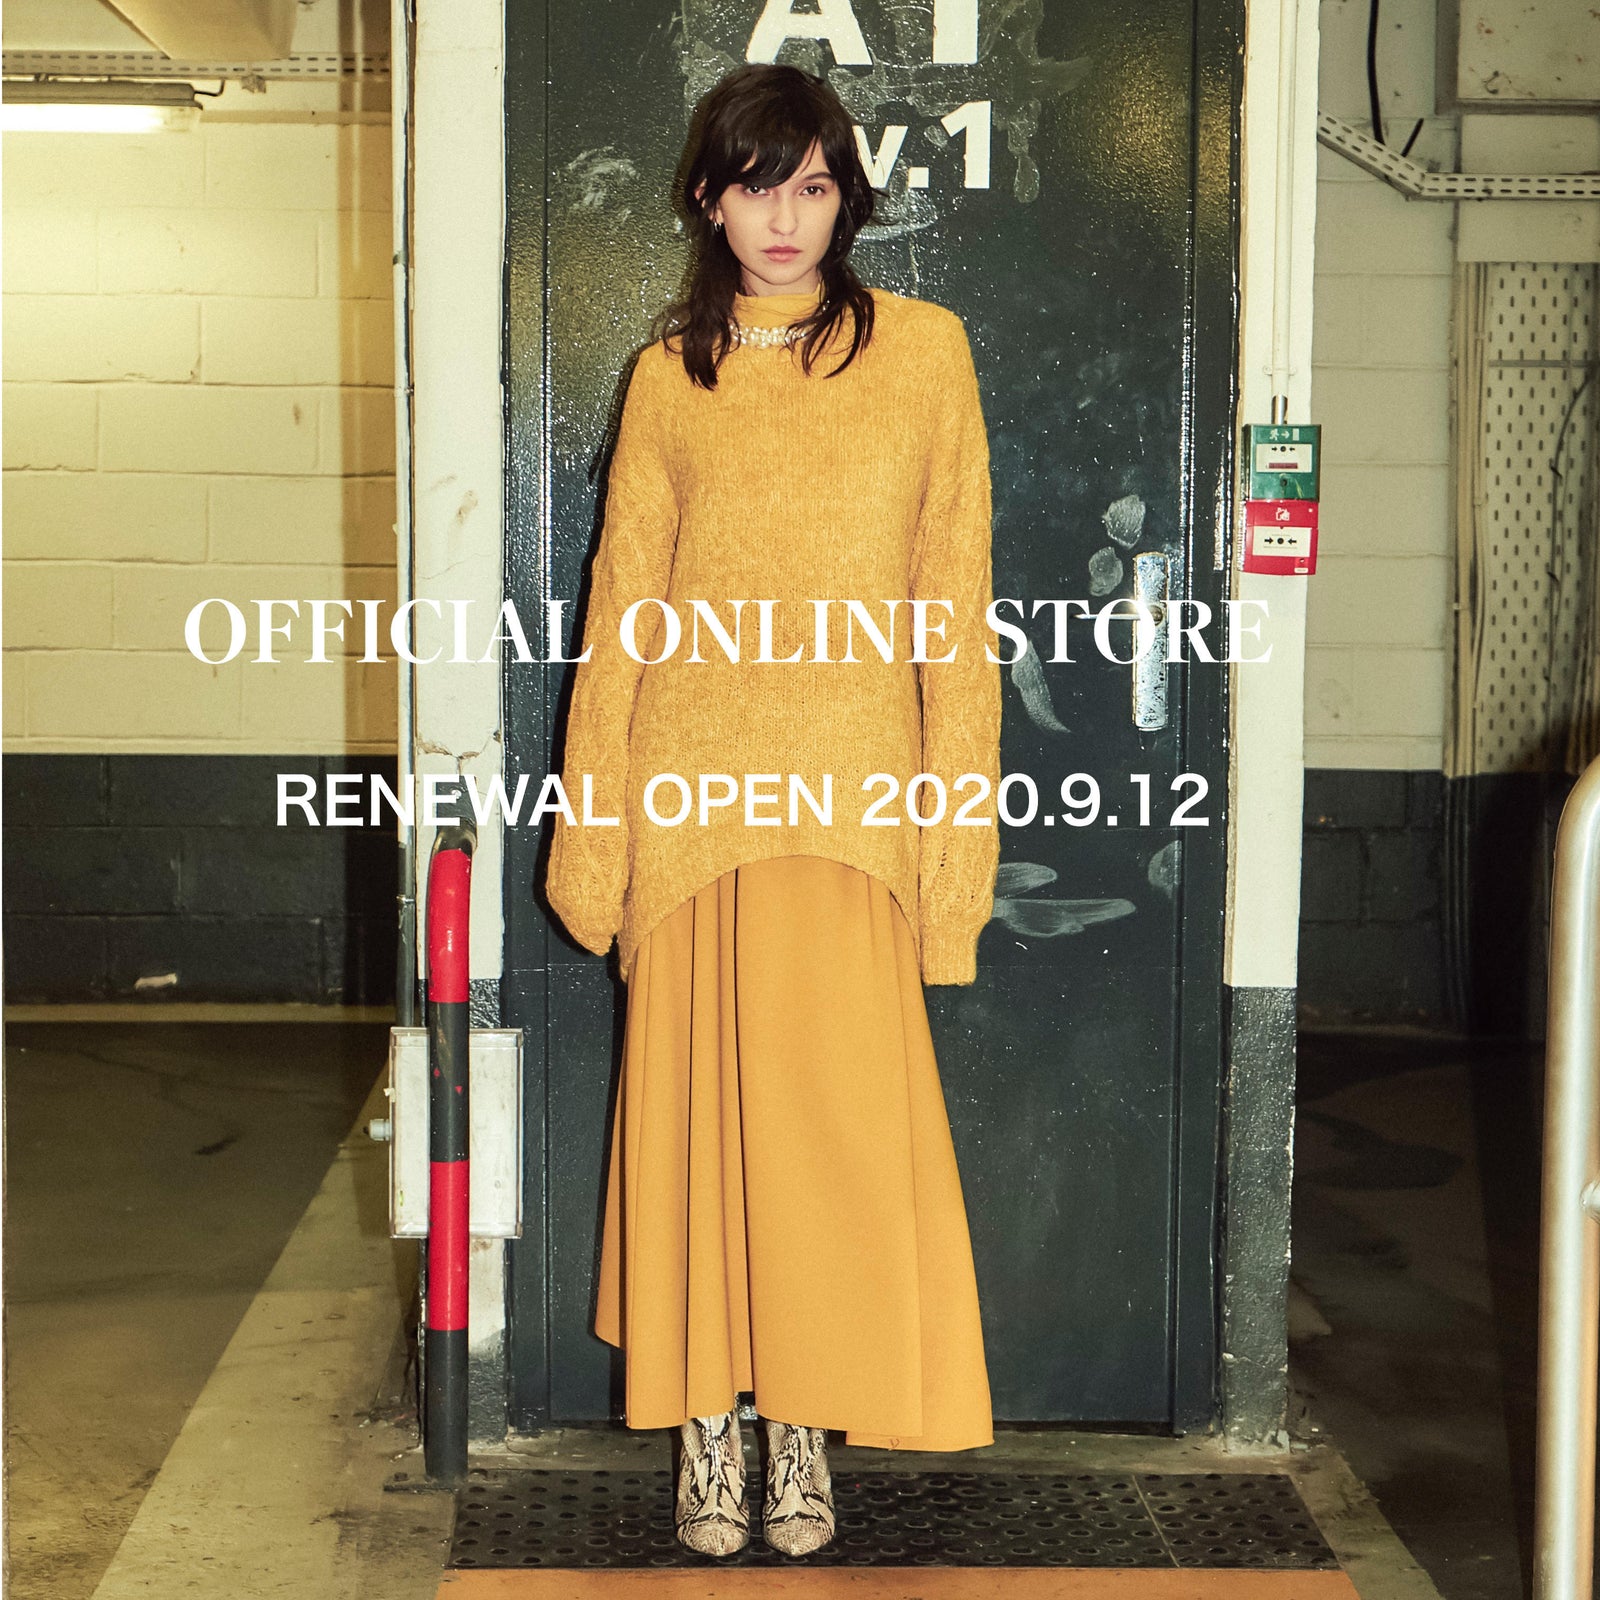 OFFICIAL ONLINE STORE RENEWAL OPEN